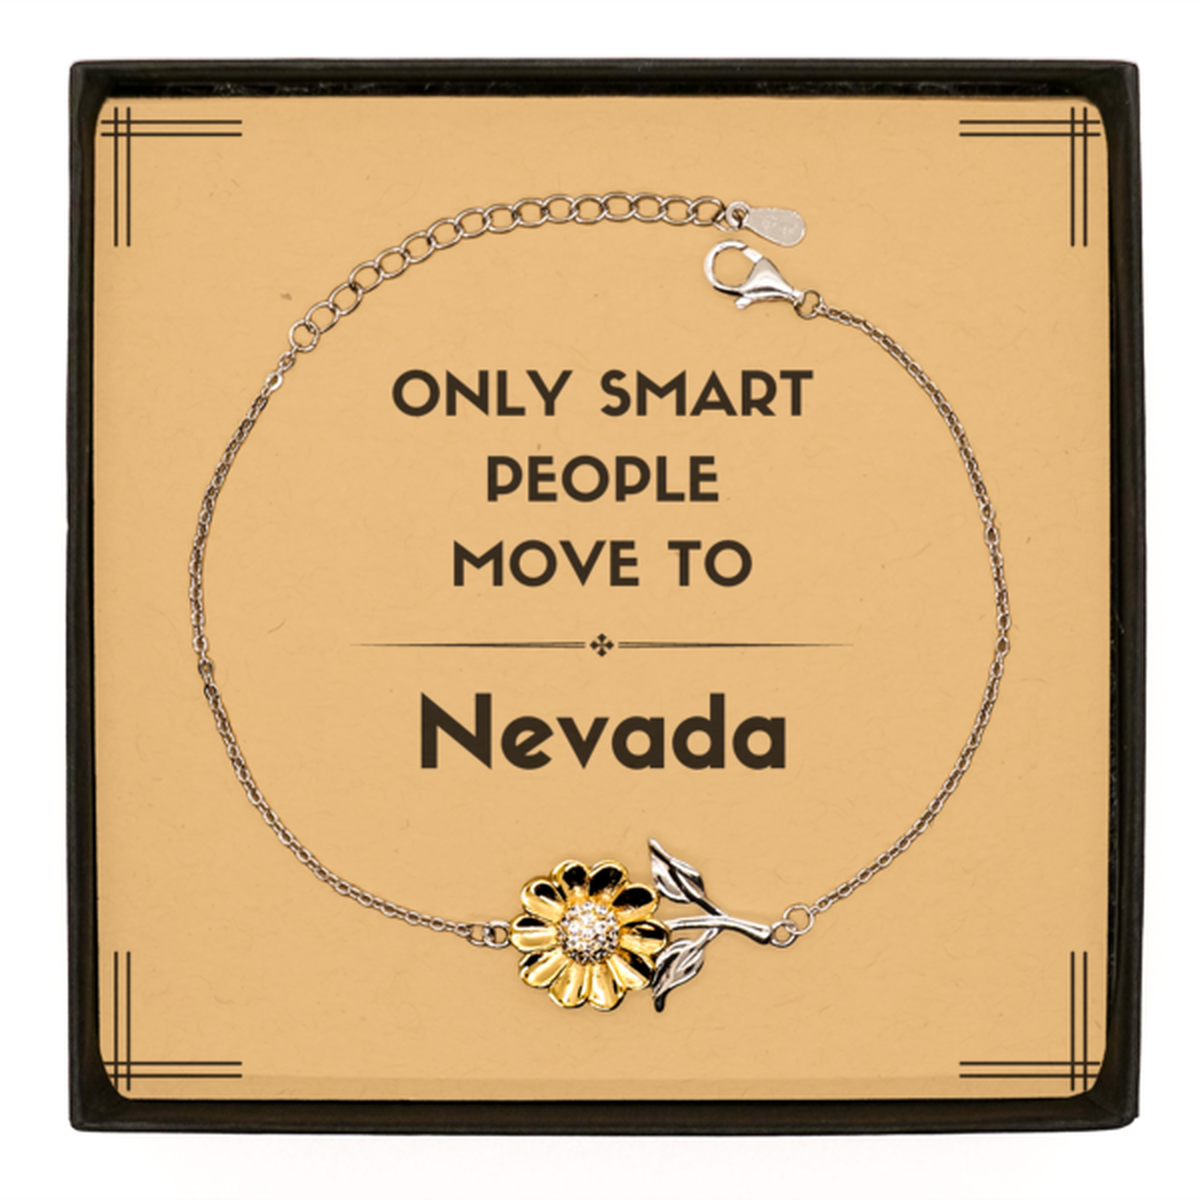 Only smart people move to Nevada Sunflower Bracelet, Message Card Gifts For Nevada, Move to Nevada Gifts for Friends Coworker Funny Saying Quote